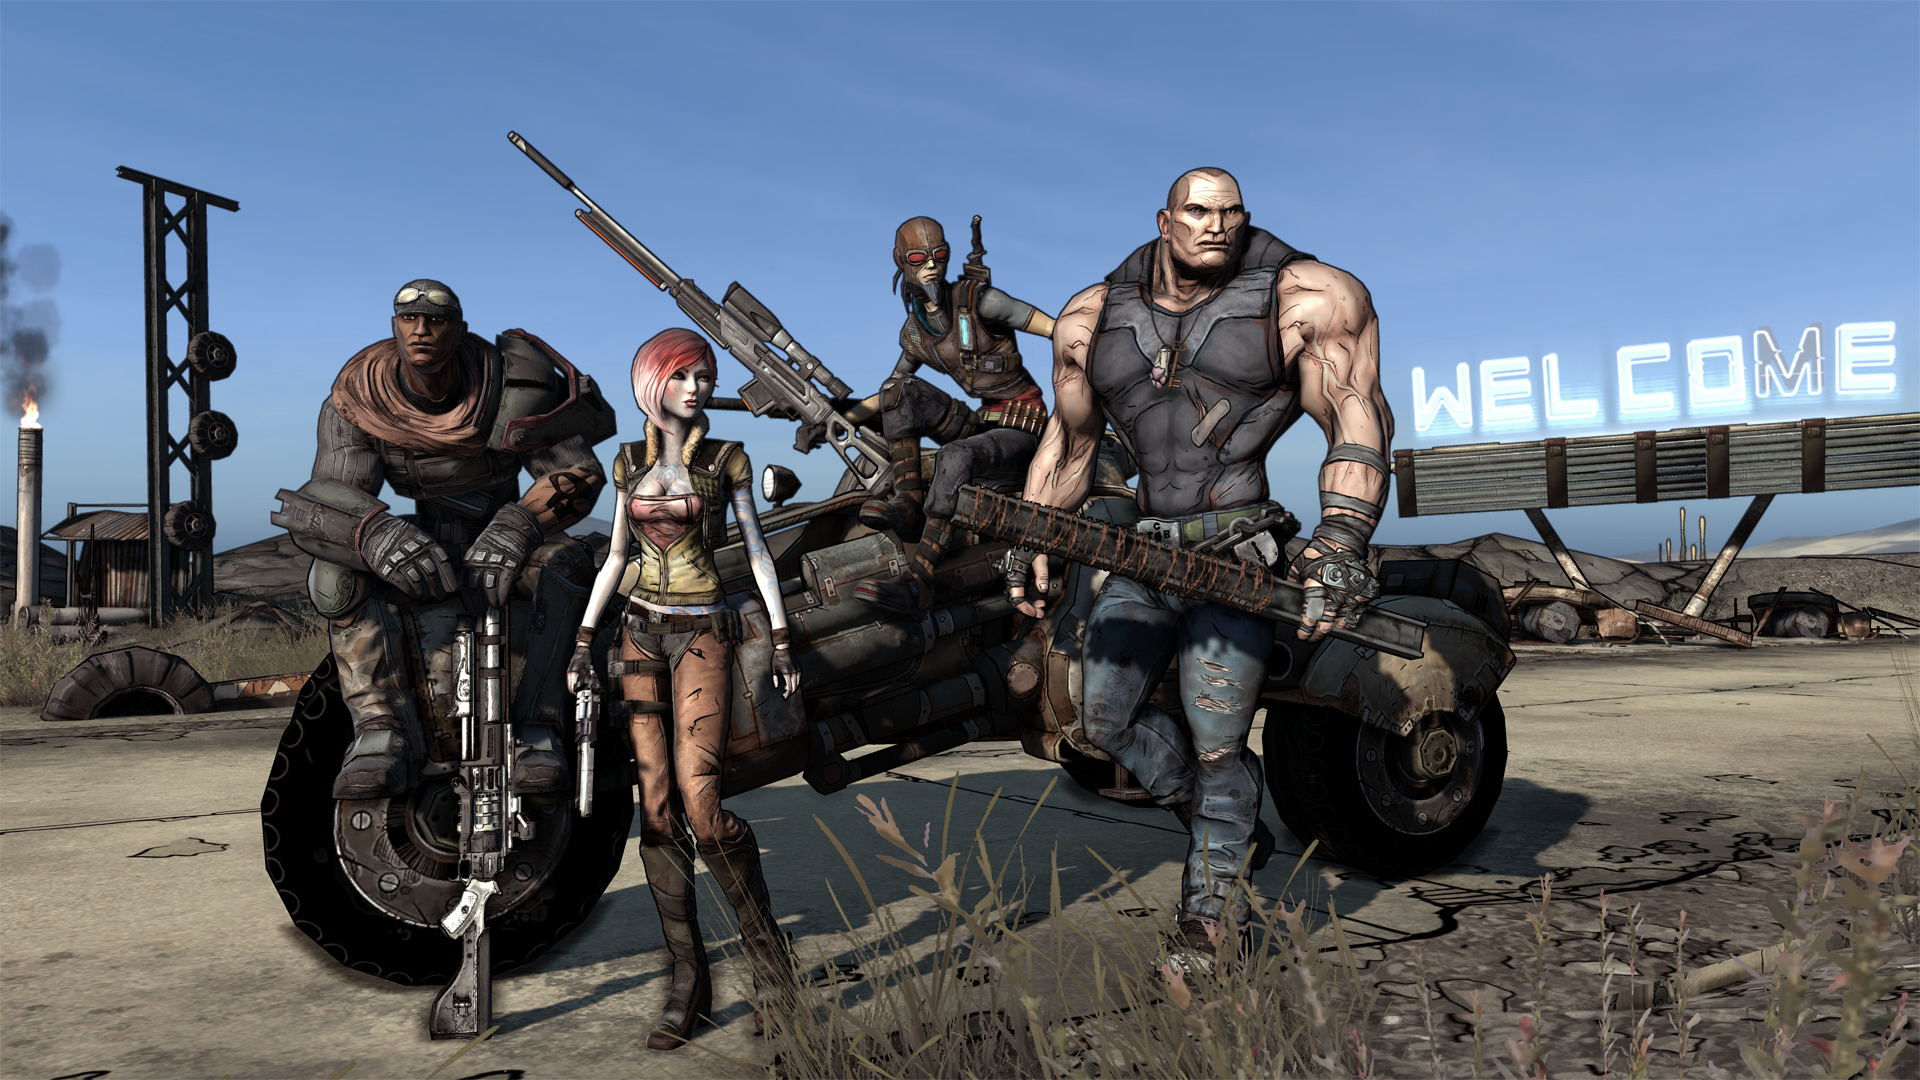 Roland, Lilith, Mordecai, and Brick standing together in Borderlands.